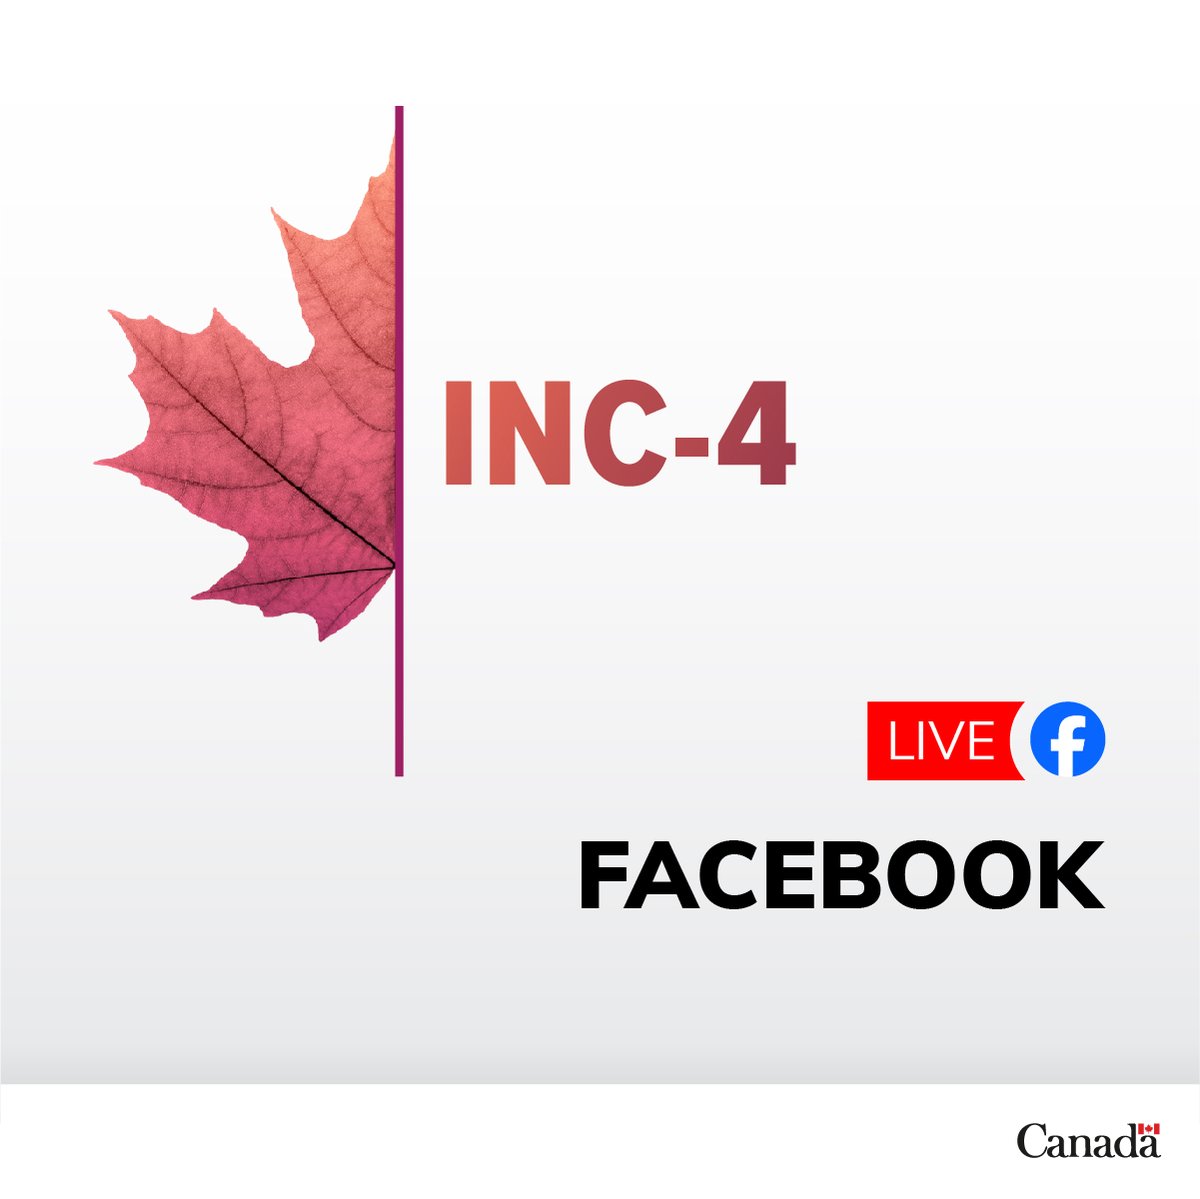 🔴 #Live now: media gather for a press conference at the Shaw Centre in #Ottawa in collaboration with @WWF ahead of #INC4. We are live here 👉ow.ly/EB0u50Rlofl